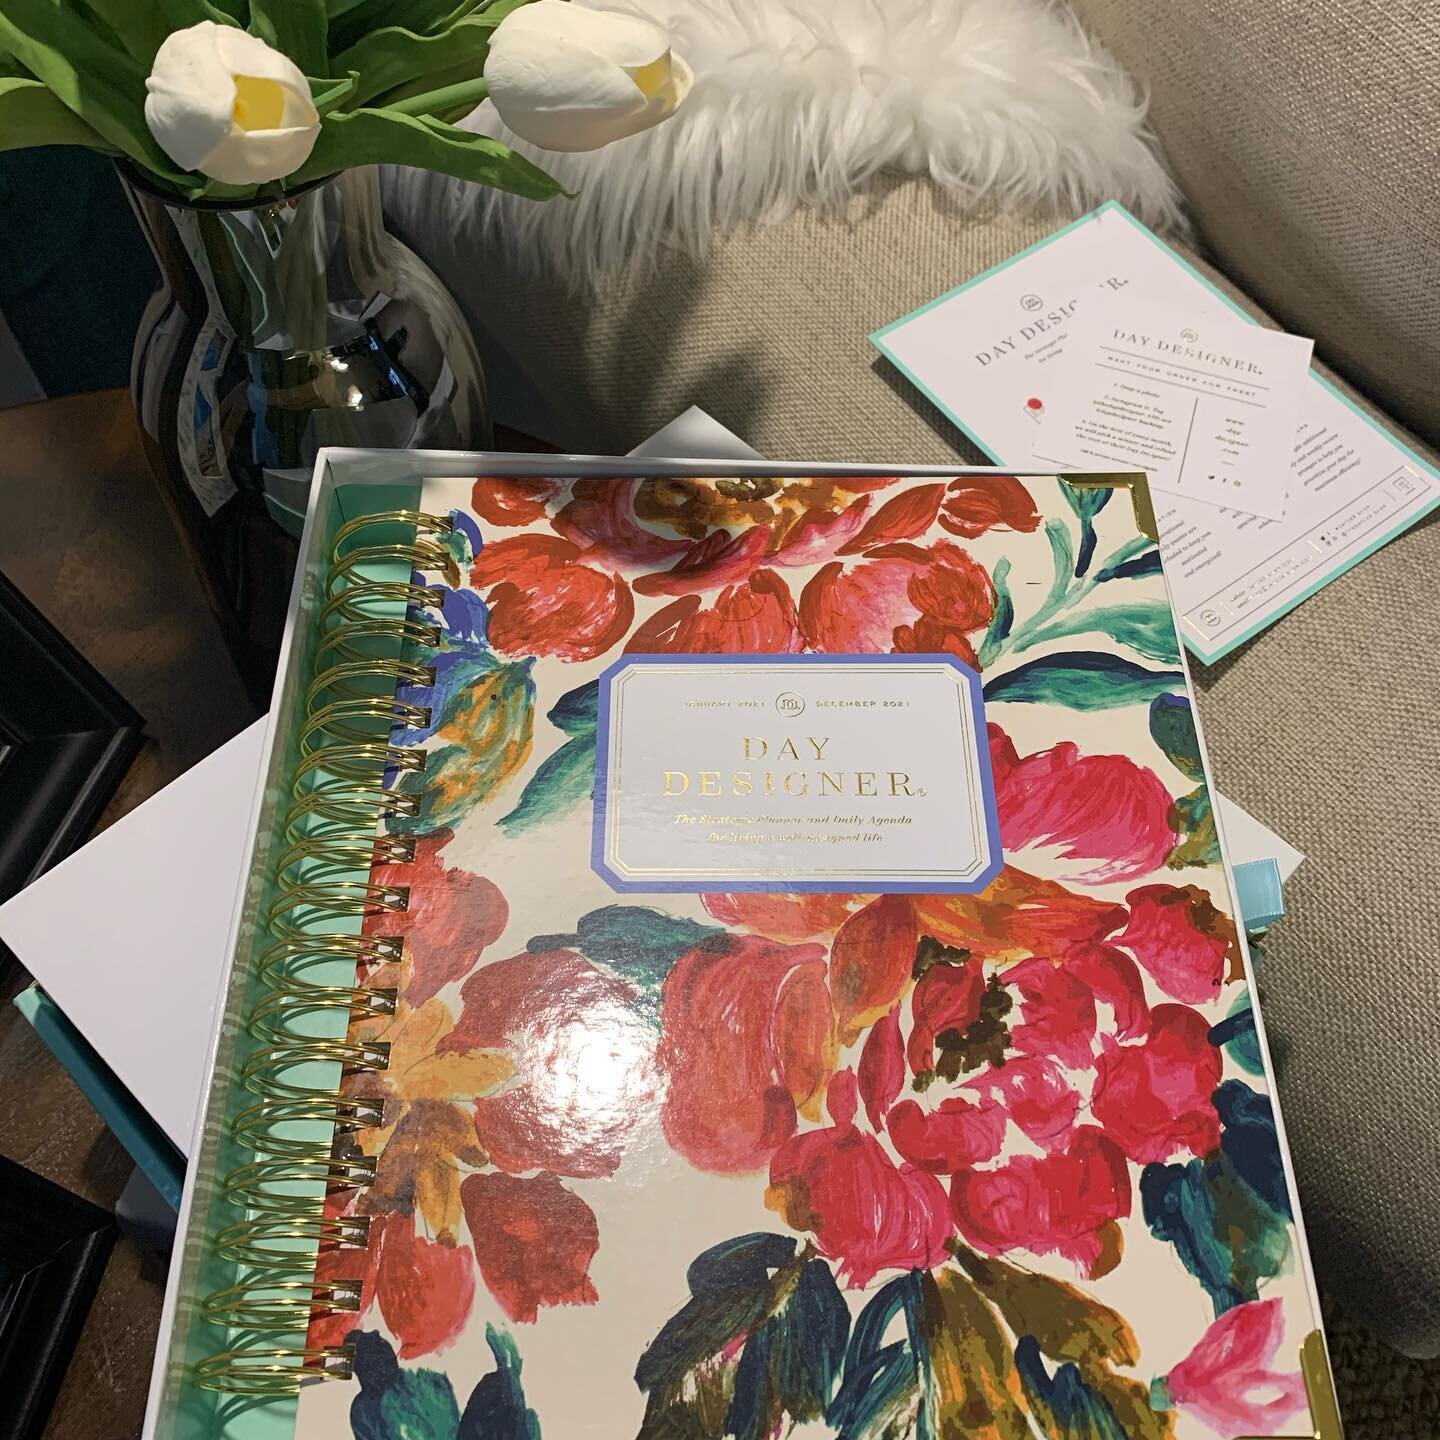 Loving my planner! This one did not disappoint. The @thedaydesigner was just what I was looking for...I&rsquo;m in ❤️#thedaydesigner